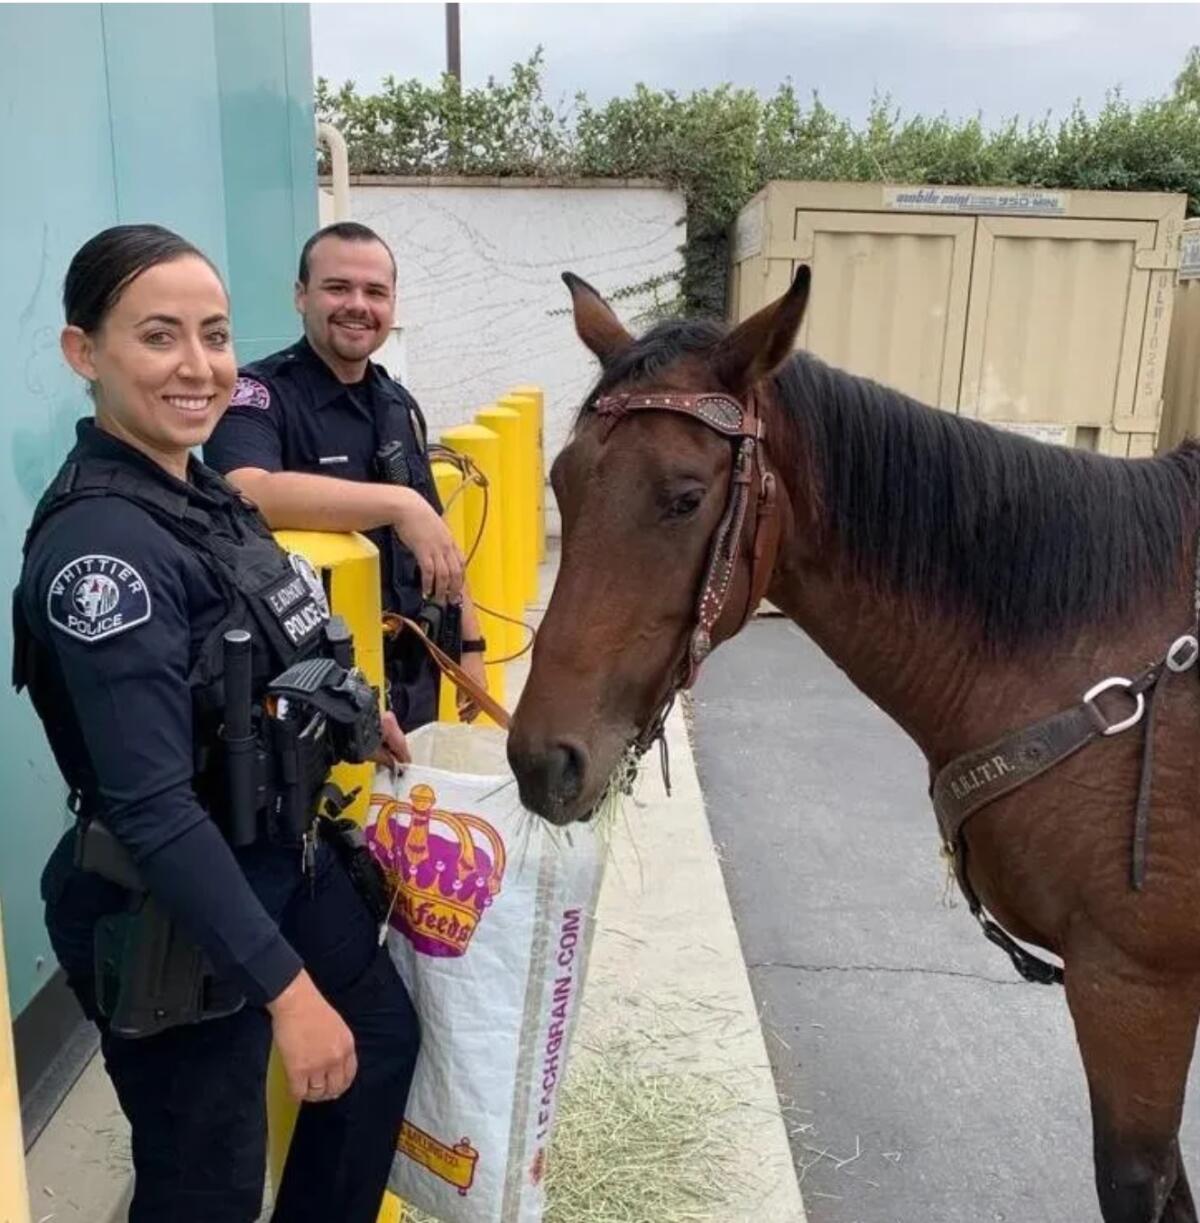 Two police officers smile next to a horse.